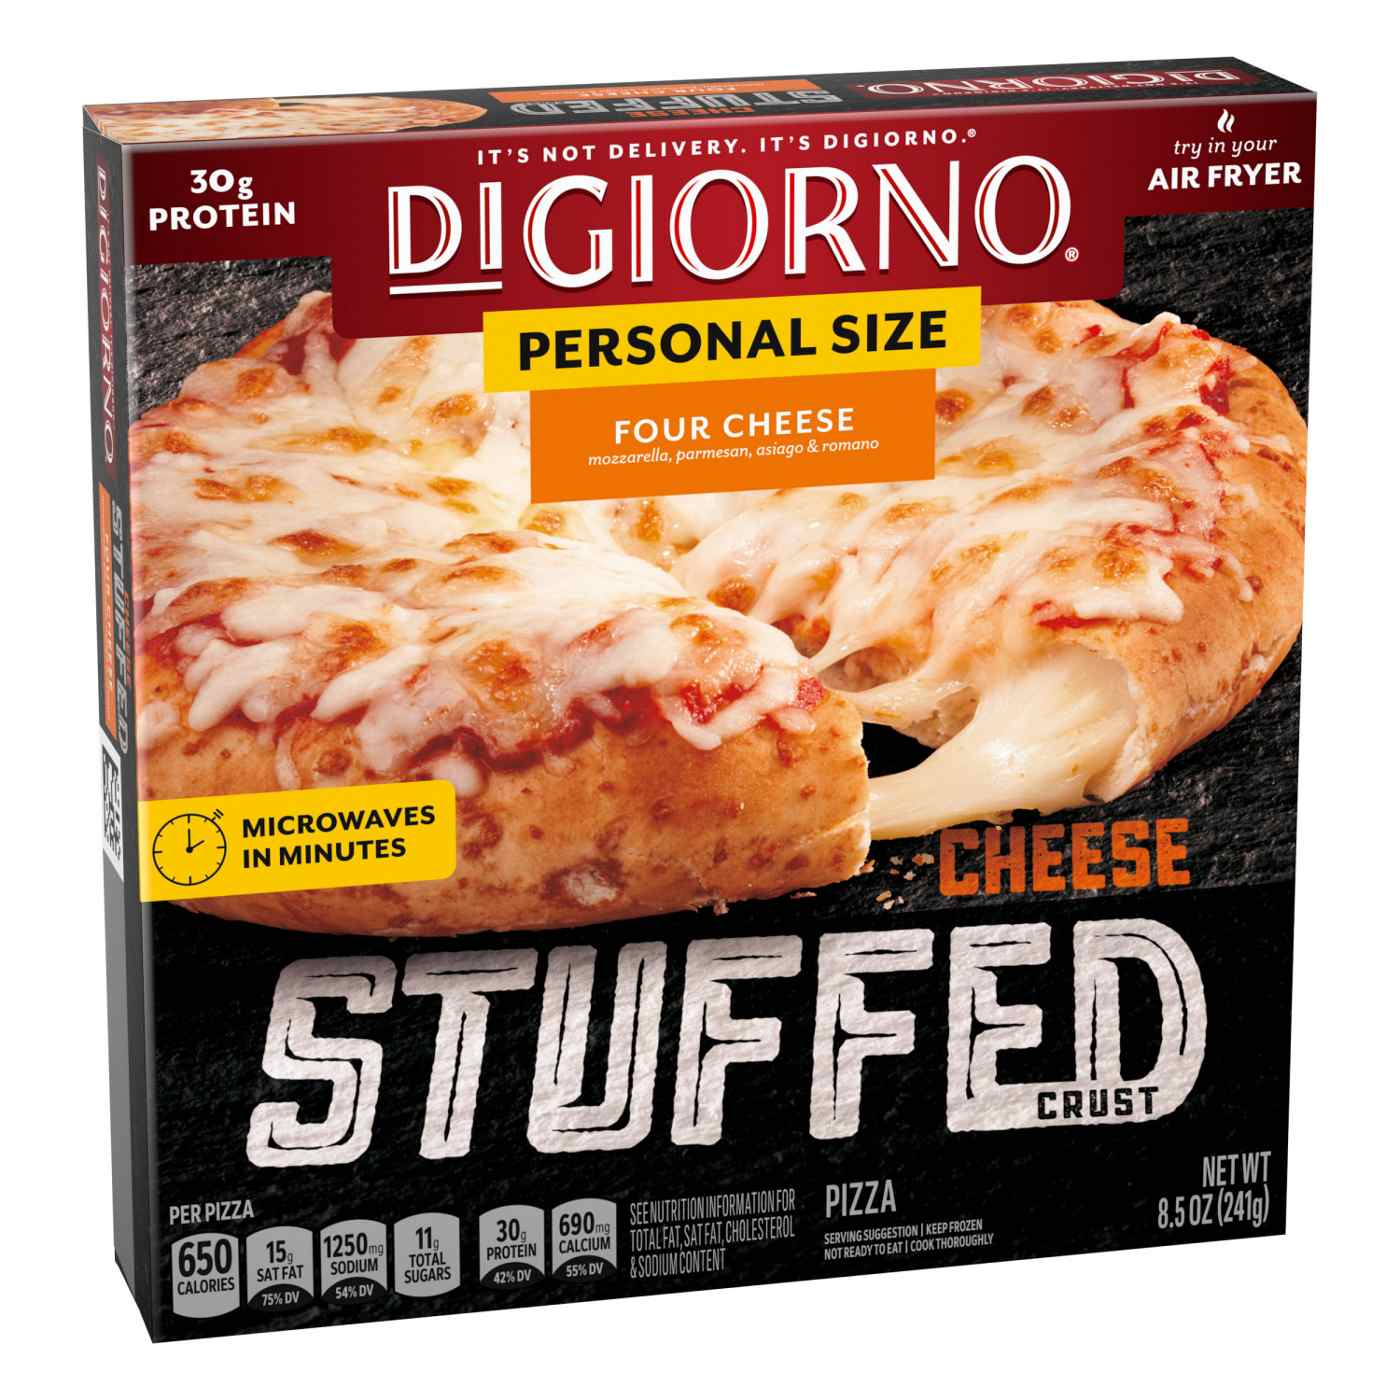 DiGiorno Cheese Stuffed Crust Personal Size Frozen Pizza - Four Cheese; image 7 of 8